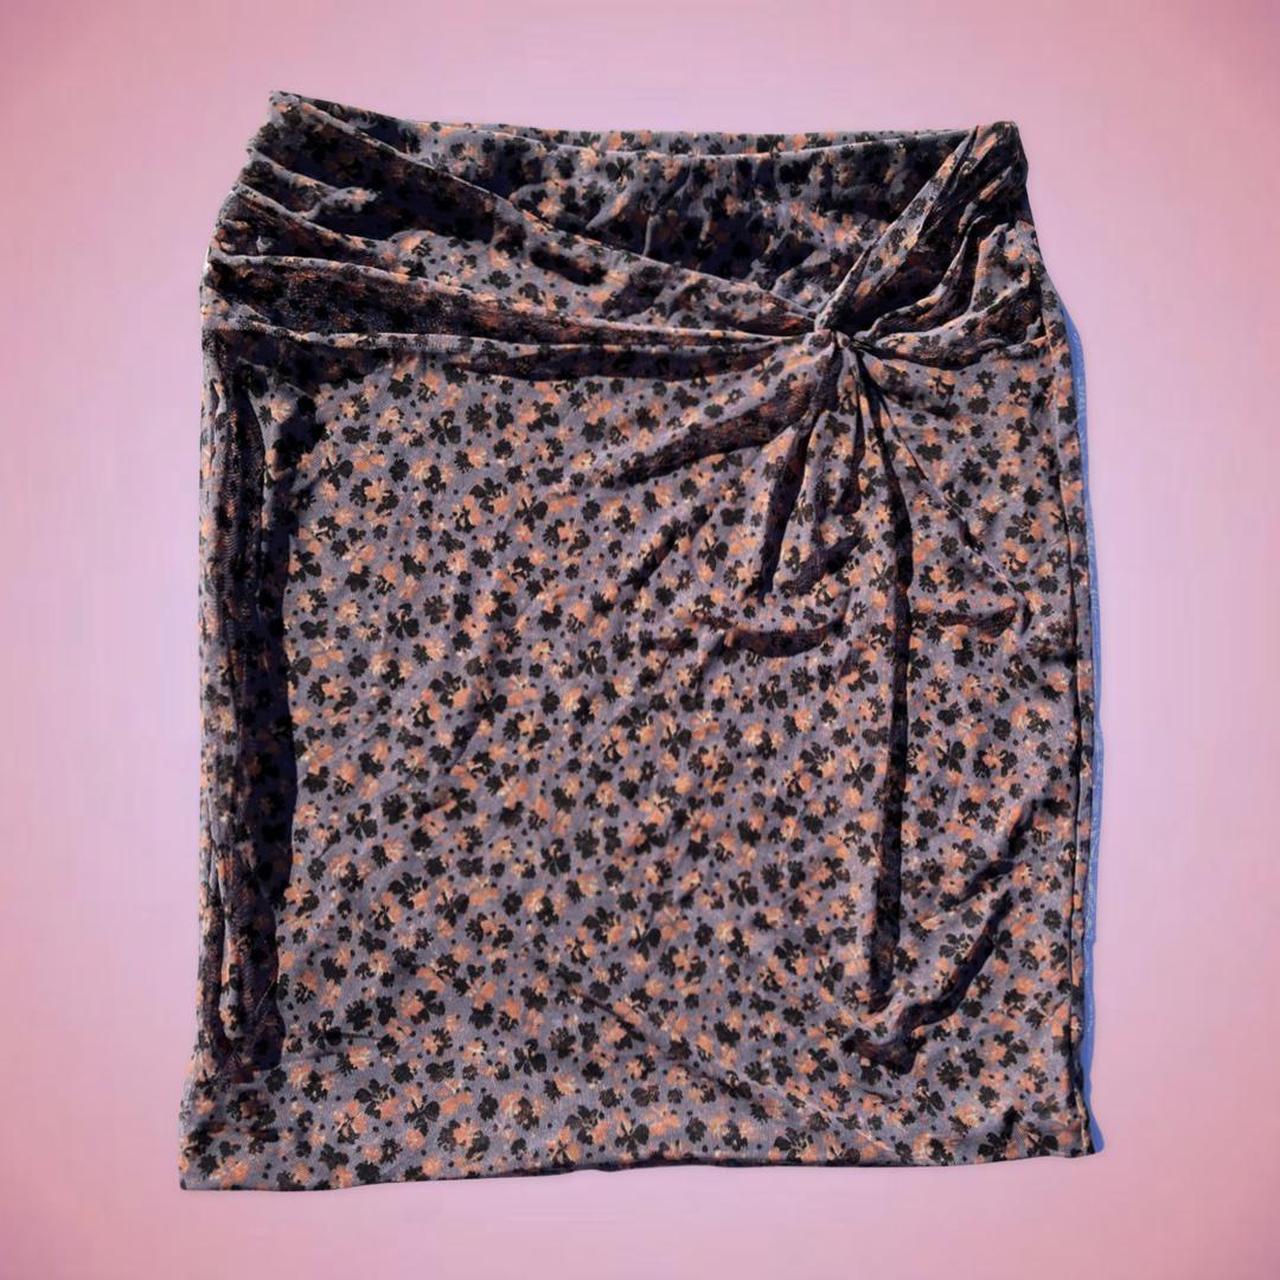 Product Image 2 - retro early 2000s floral skirt